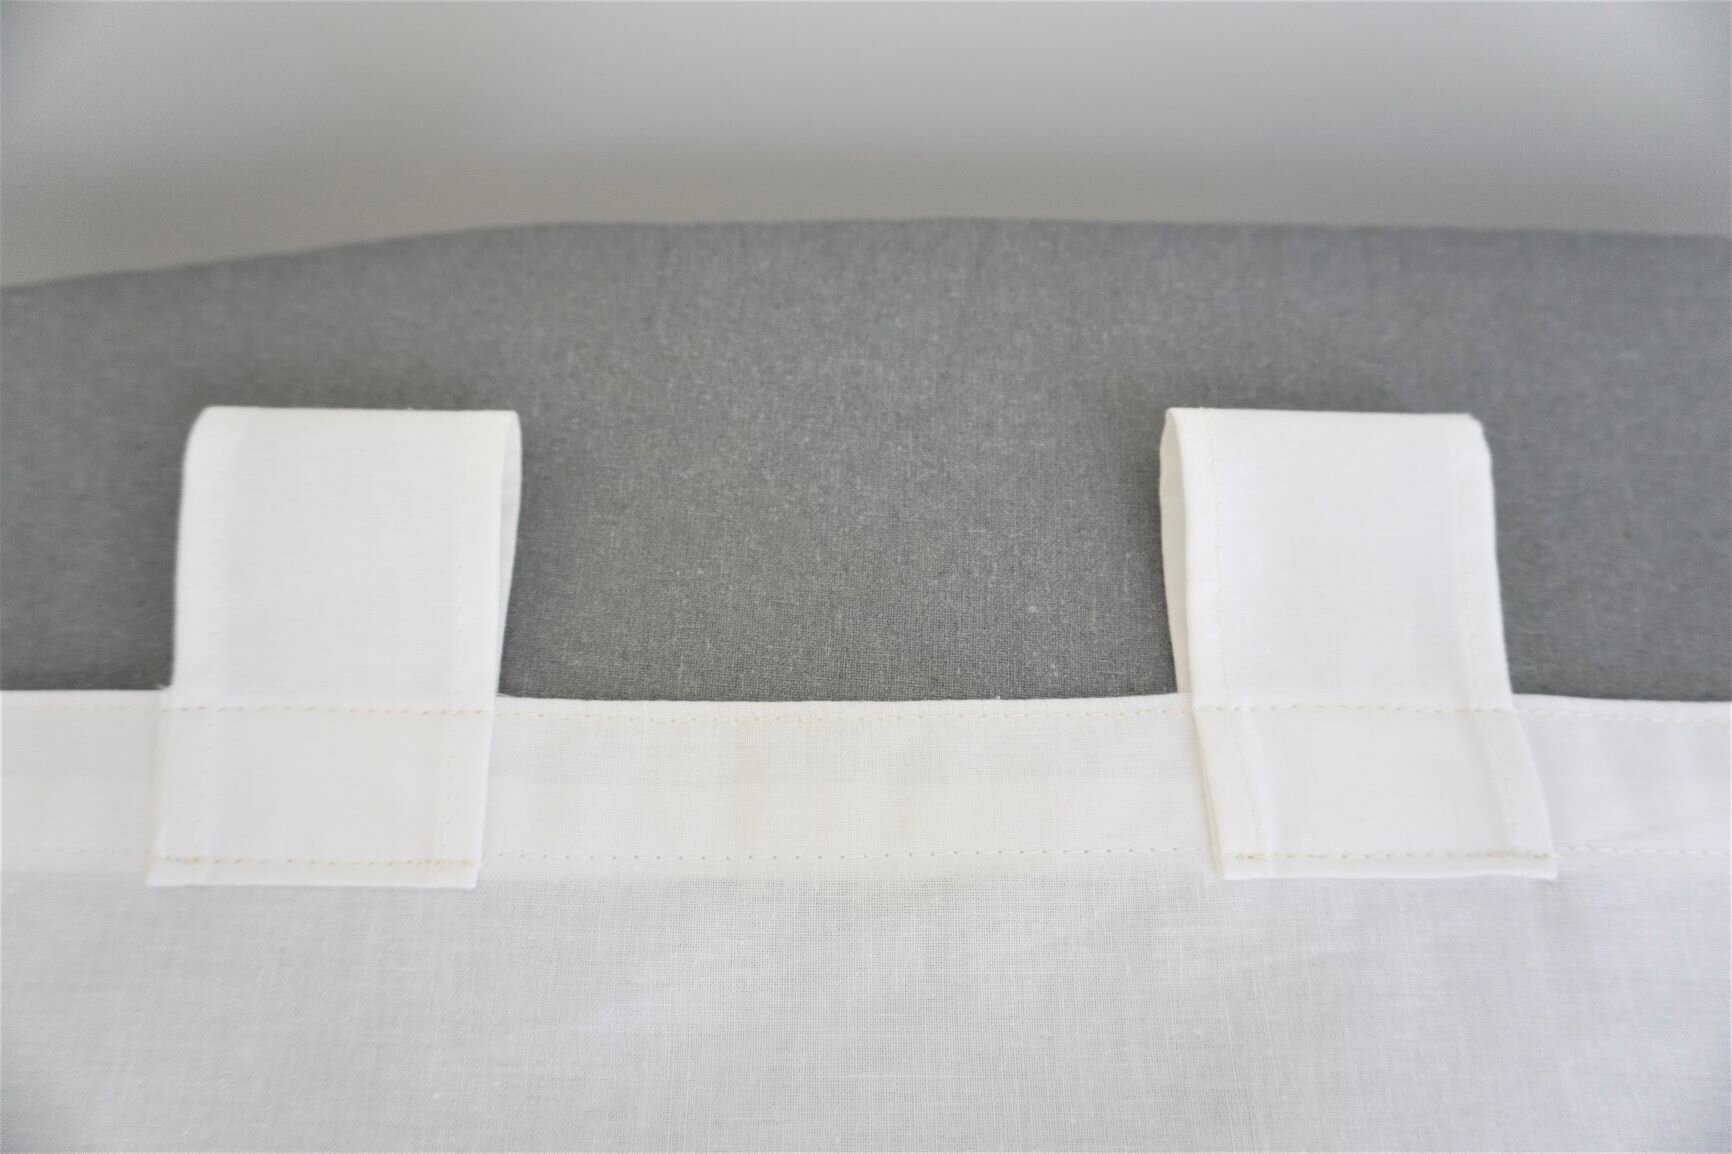 Loops with two rows of topstitching, one on the curtain edge and one at the loop edge that extends 1 inch into the curtain panel